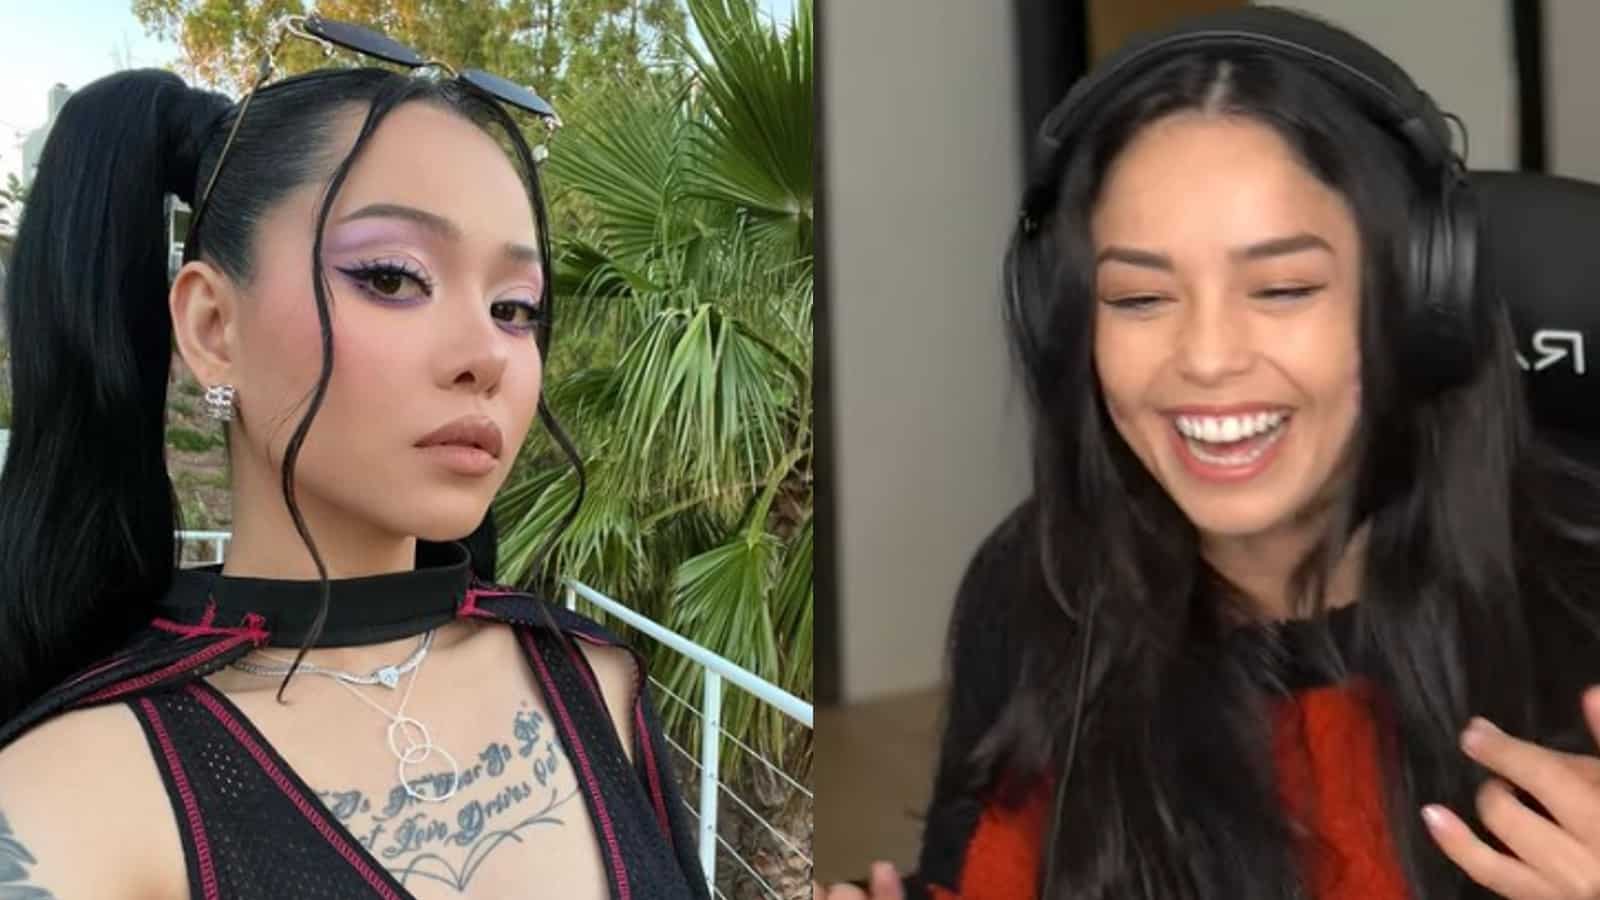 Valkyrae streaming on YouTube and Bella Poarch